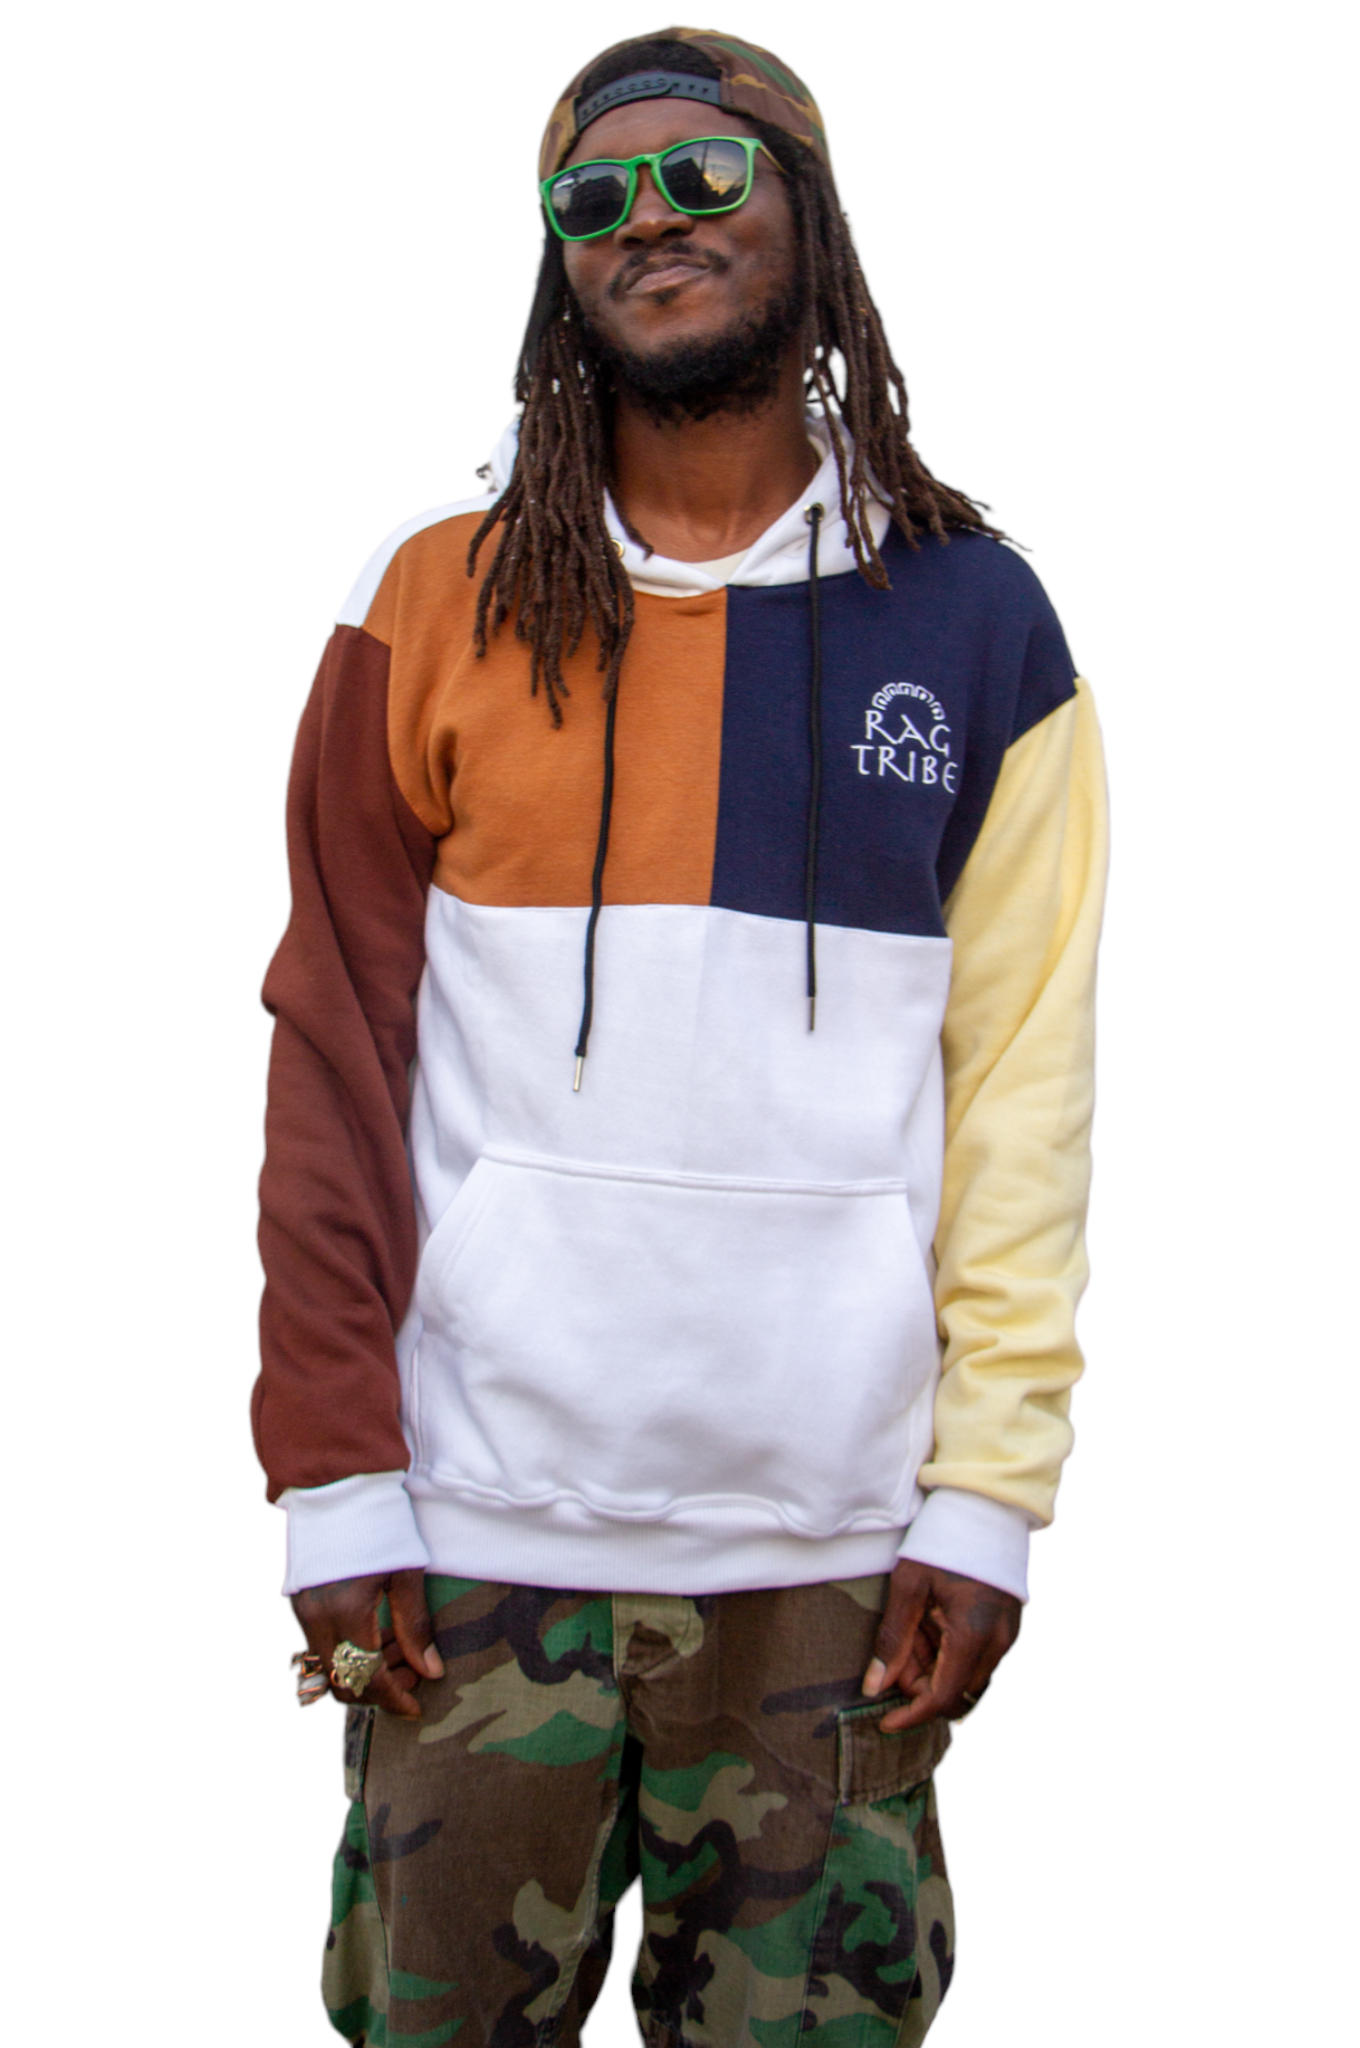 The Rama Hoodie - Ragtribe Ethical Clothing & Productions, LLC